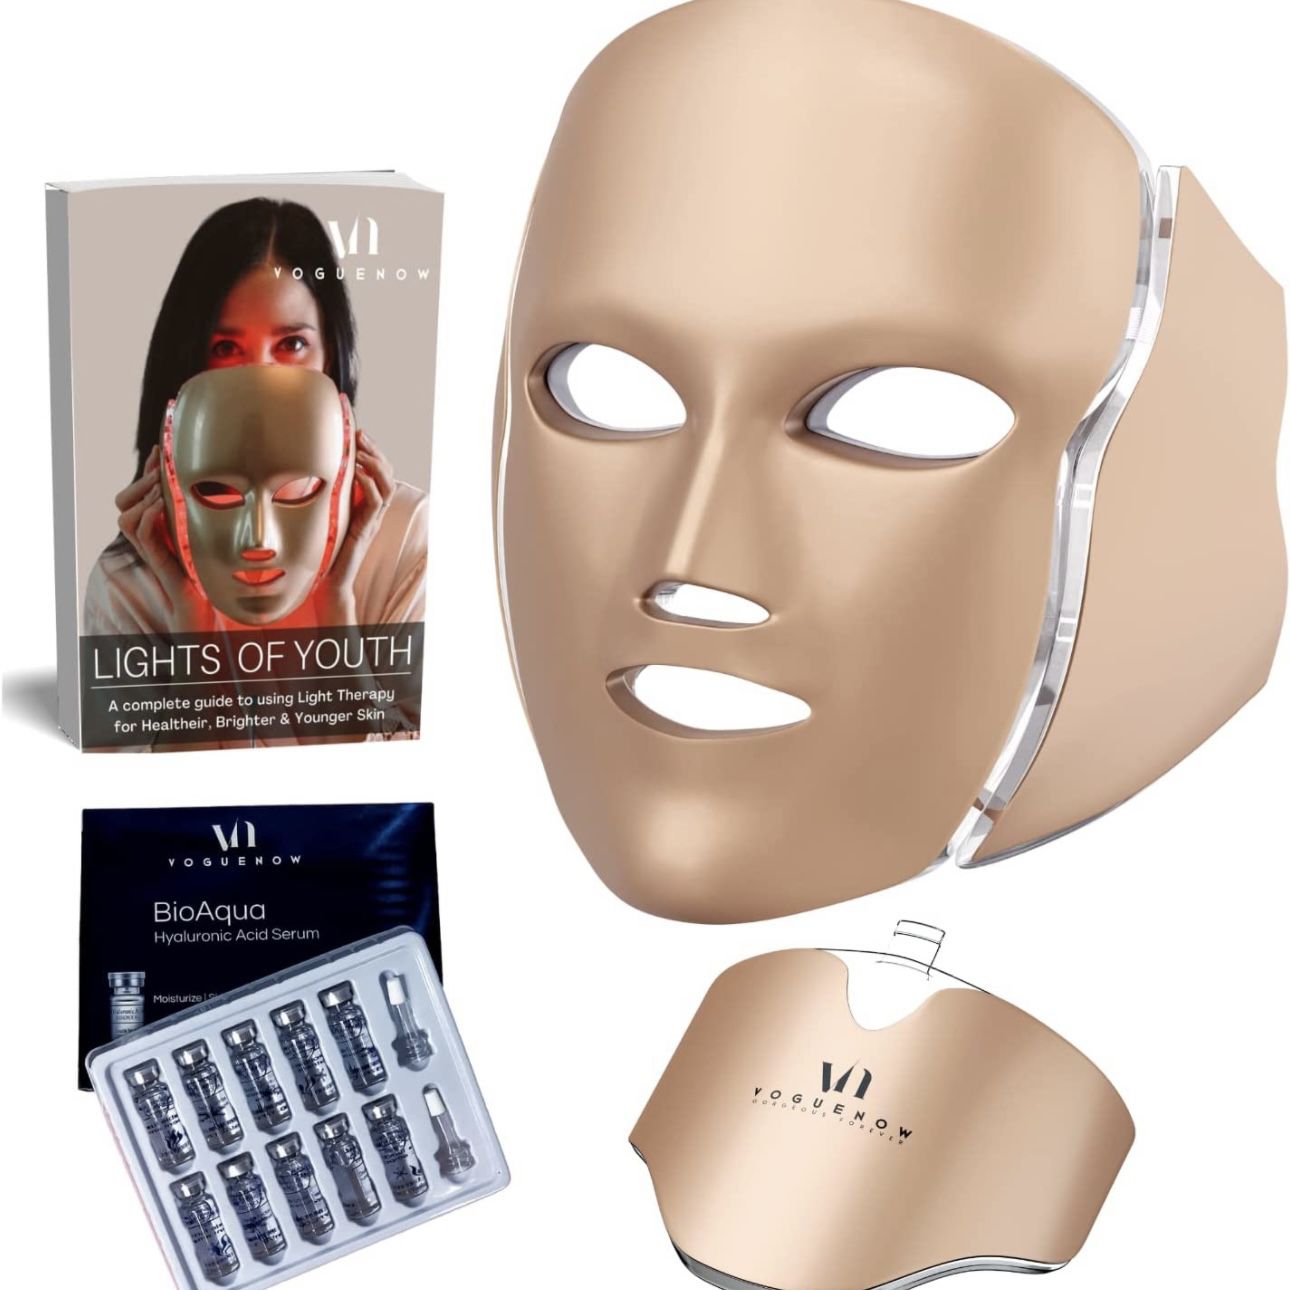 Led face mask Light Therapy - Dermawave 7 Colors Light Therapy Mask with 10 Pcs Serum Pack Eye Mask & Ebook - Spa like Light Therapy Facial for a Brig